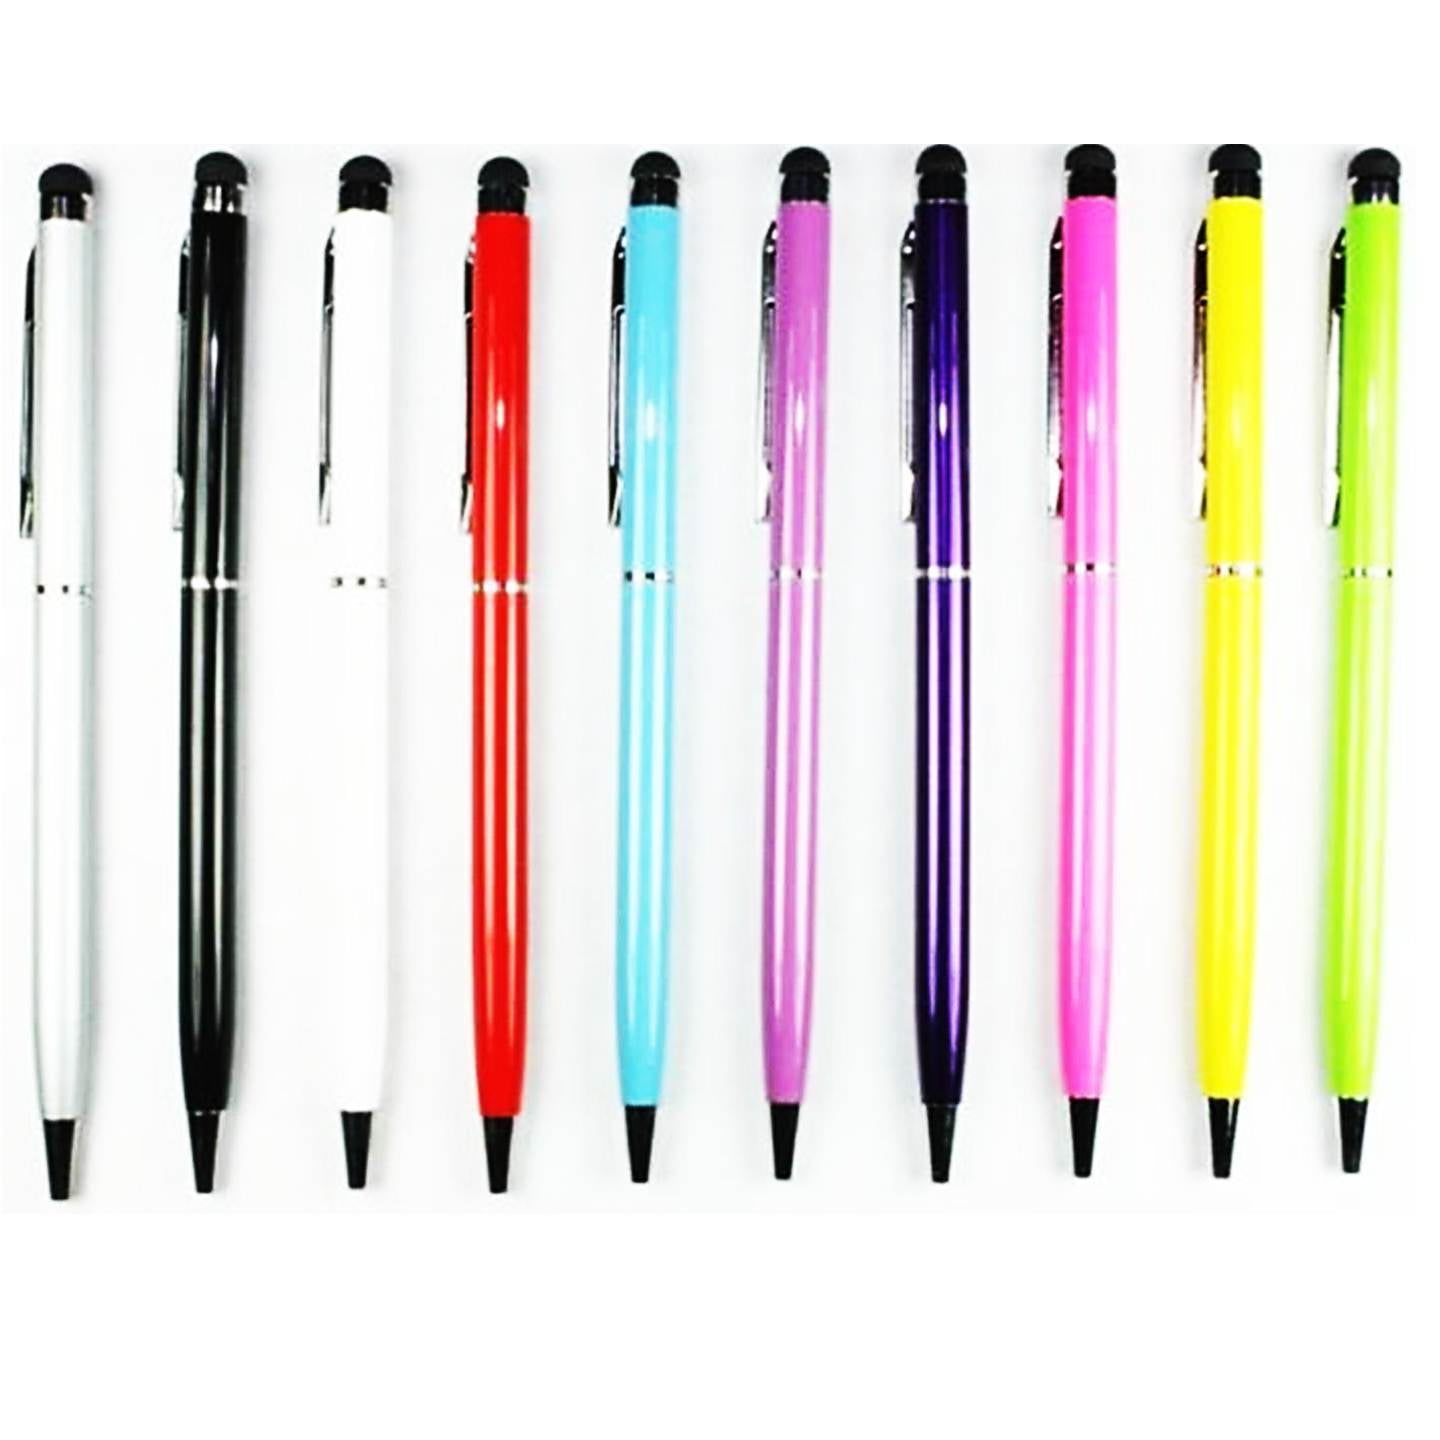 10x Metal Universal Stylus Touch Pens For Android Ipad Tablet Iphone PC Pen Hot 